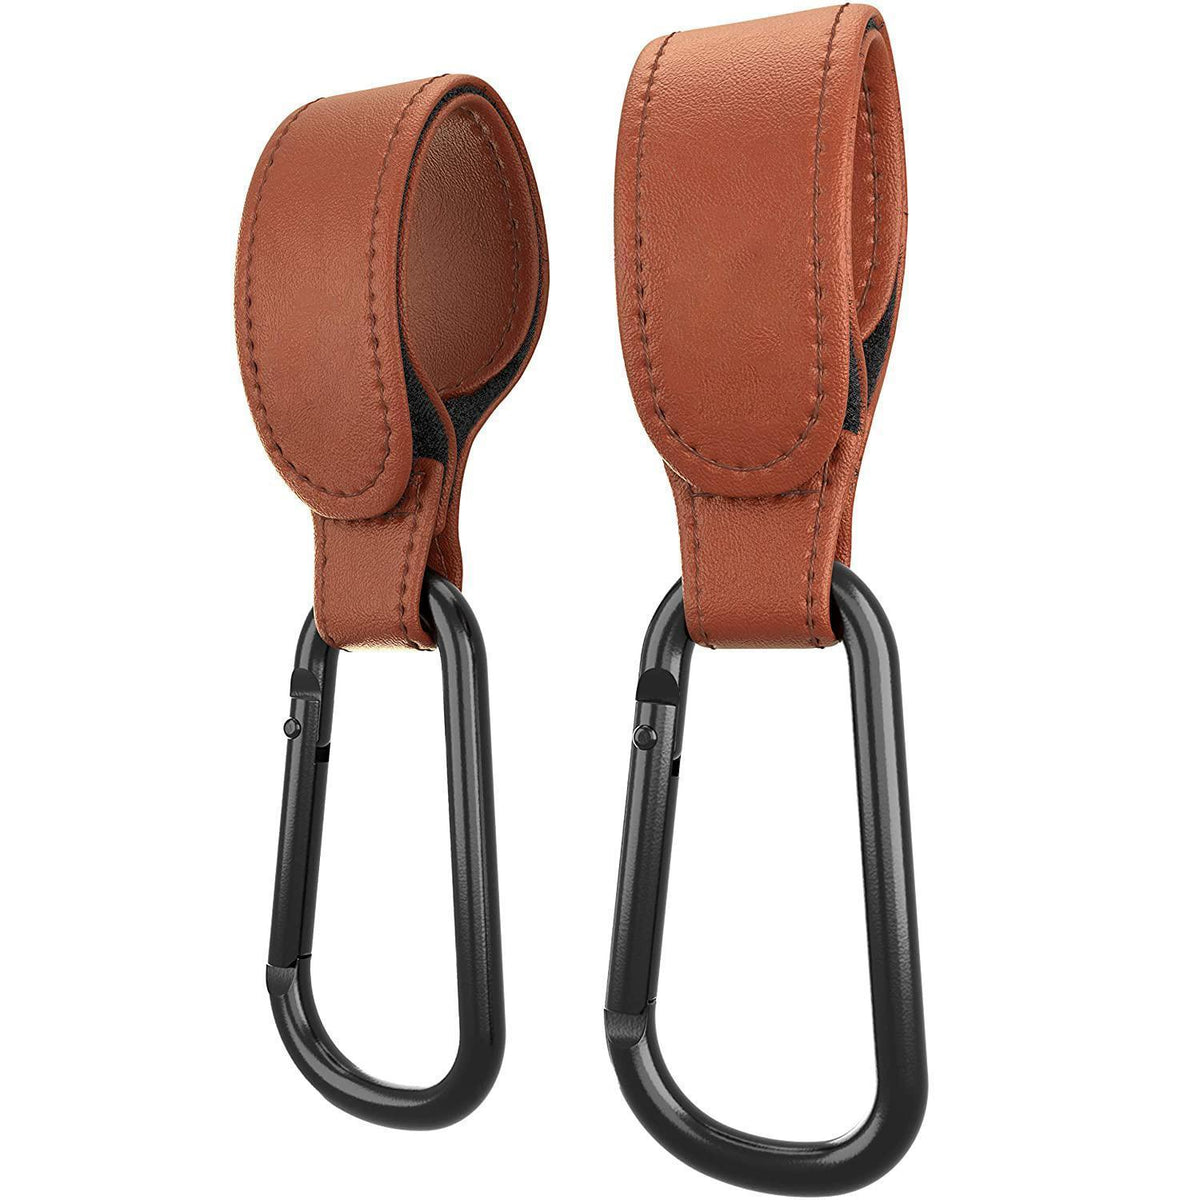 Premium Vegan Leather Baby Stroller Straps, 2 Pack-Maternity Miracles - Mom & Baby Gifts